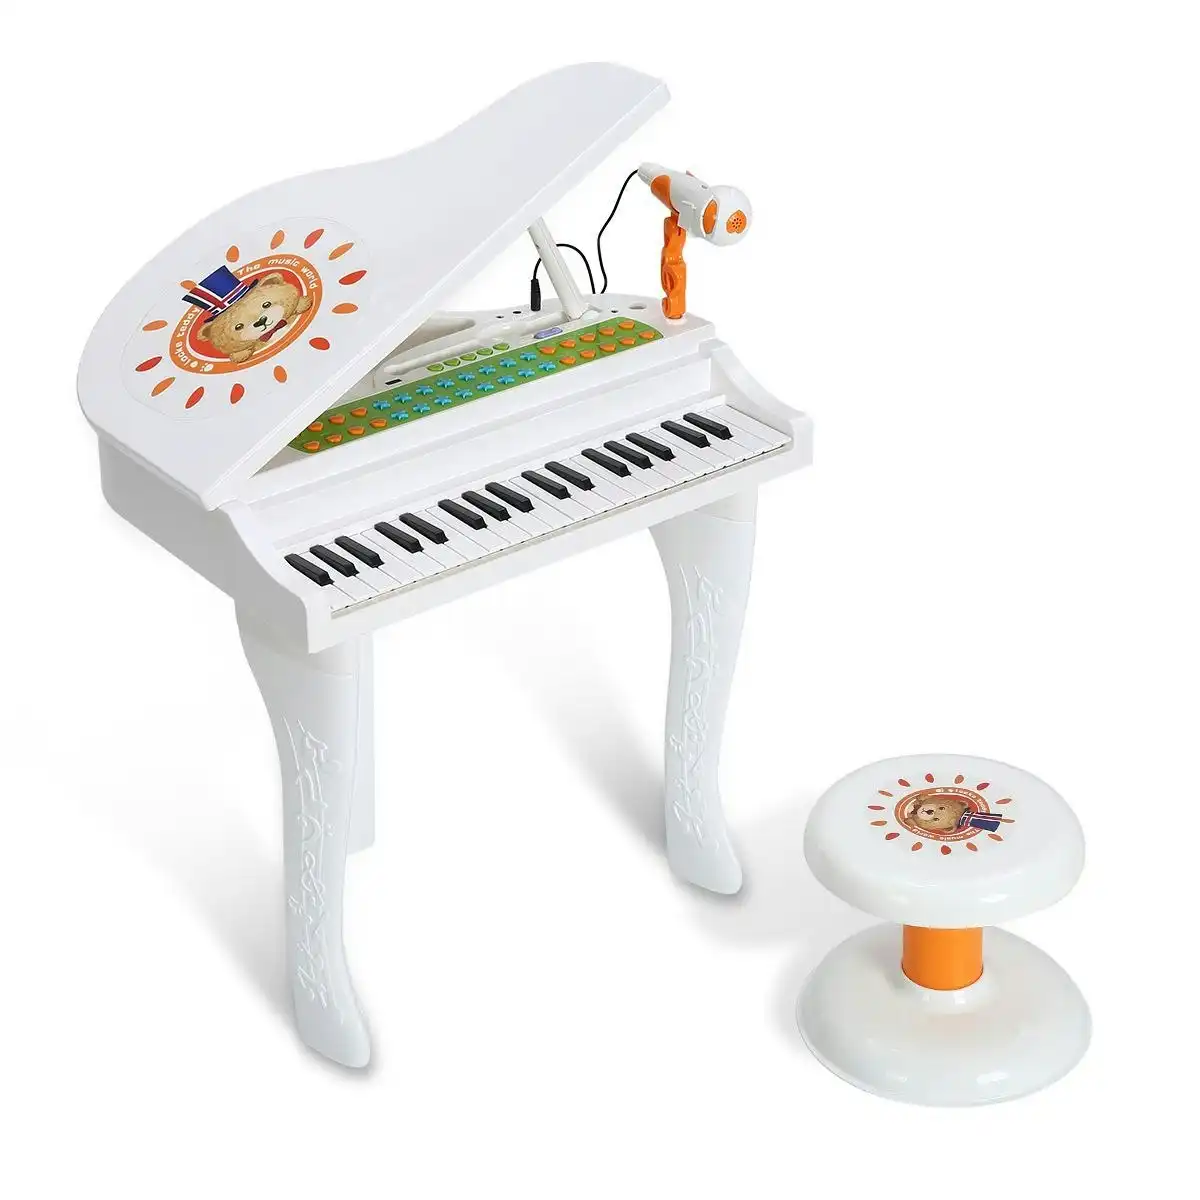 Ausway Kids Electronic Keyboard 37 Key Piano with Microphone